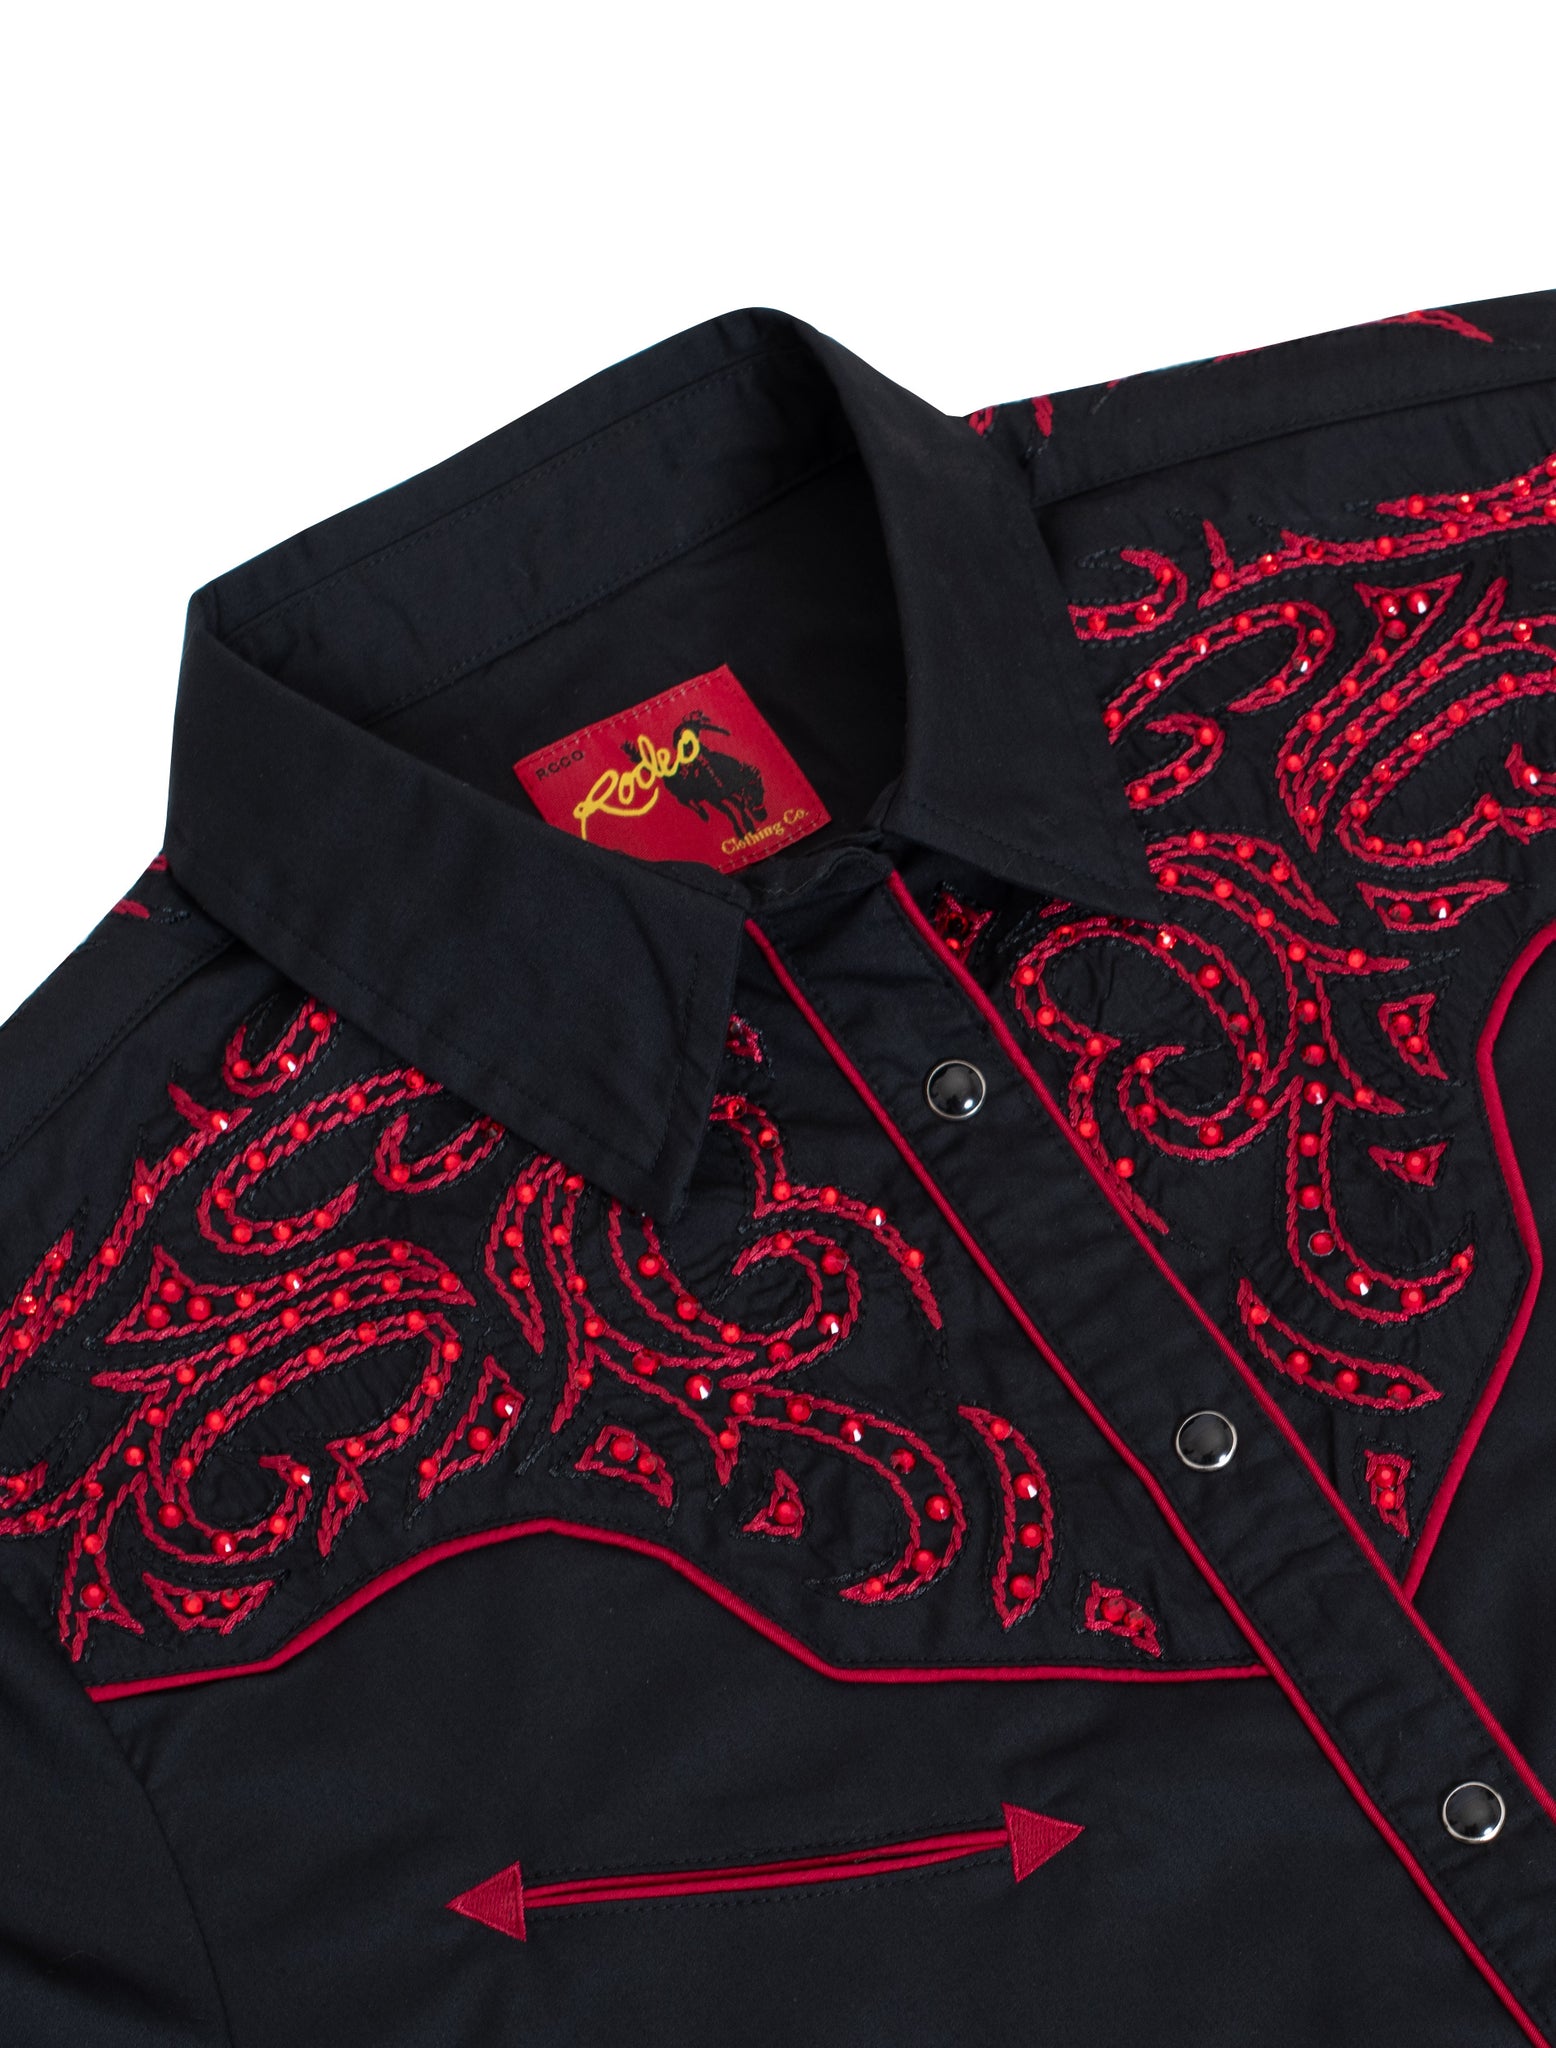 Women’s Western Embroidered diamond studded Shirts-LS500D-528